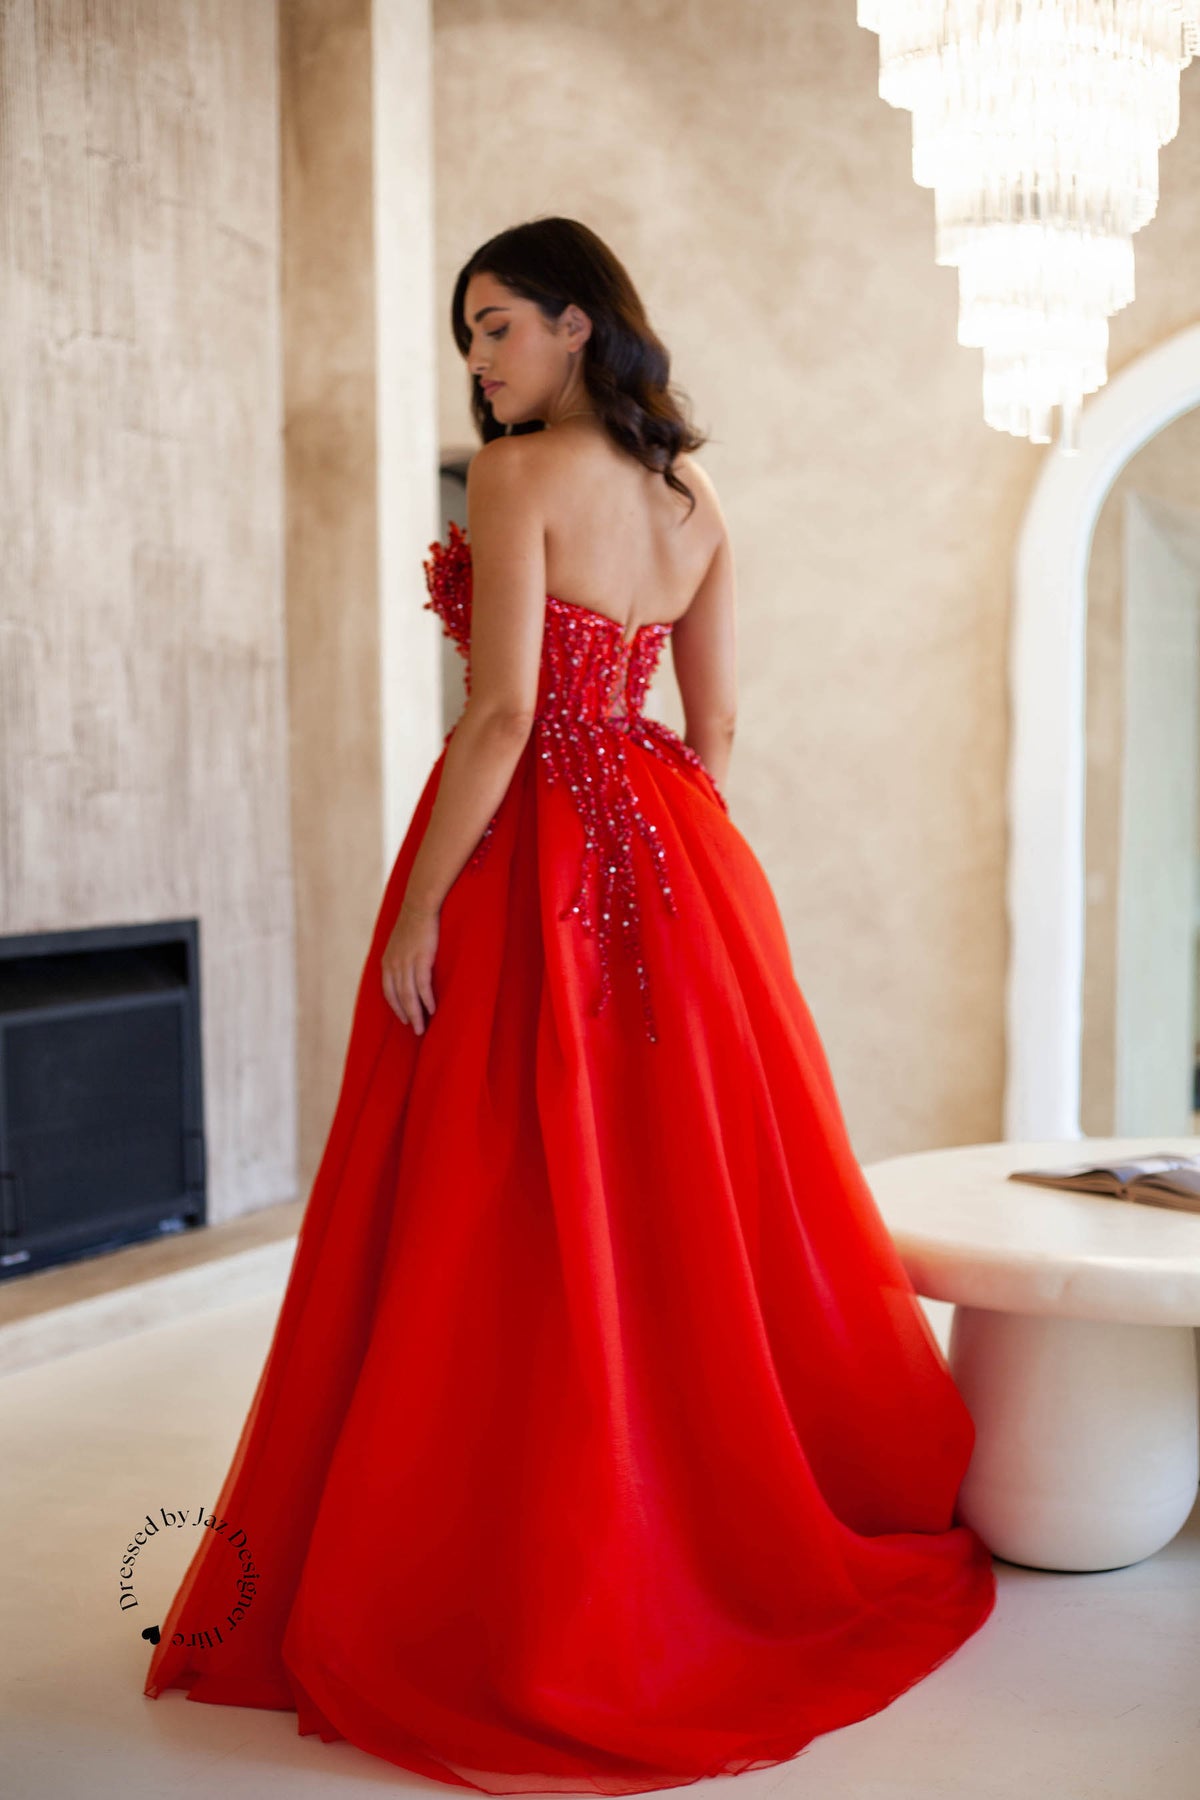 Albina Dyla red ball gown hire